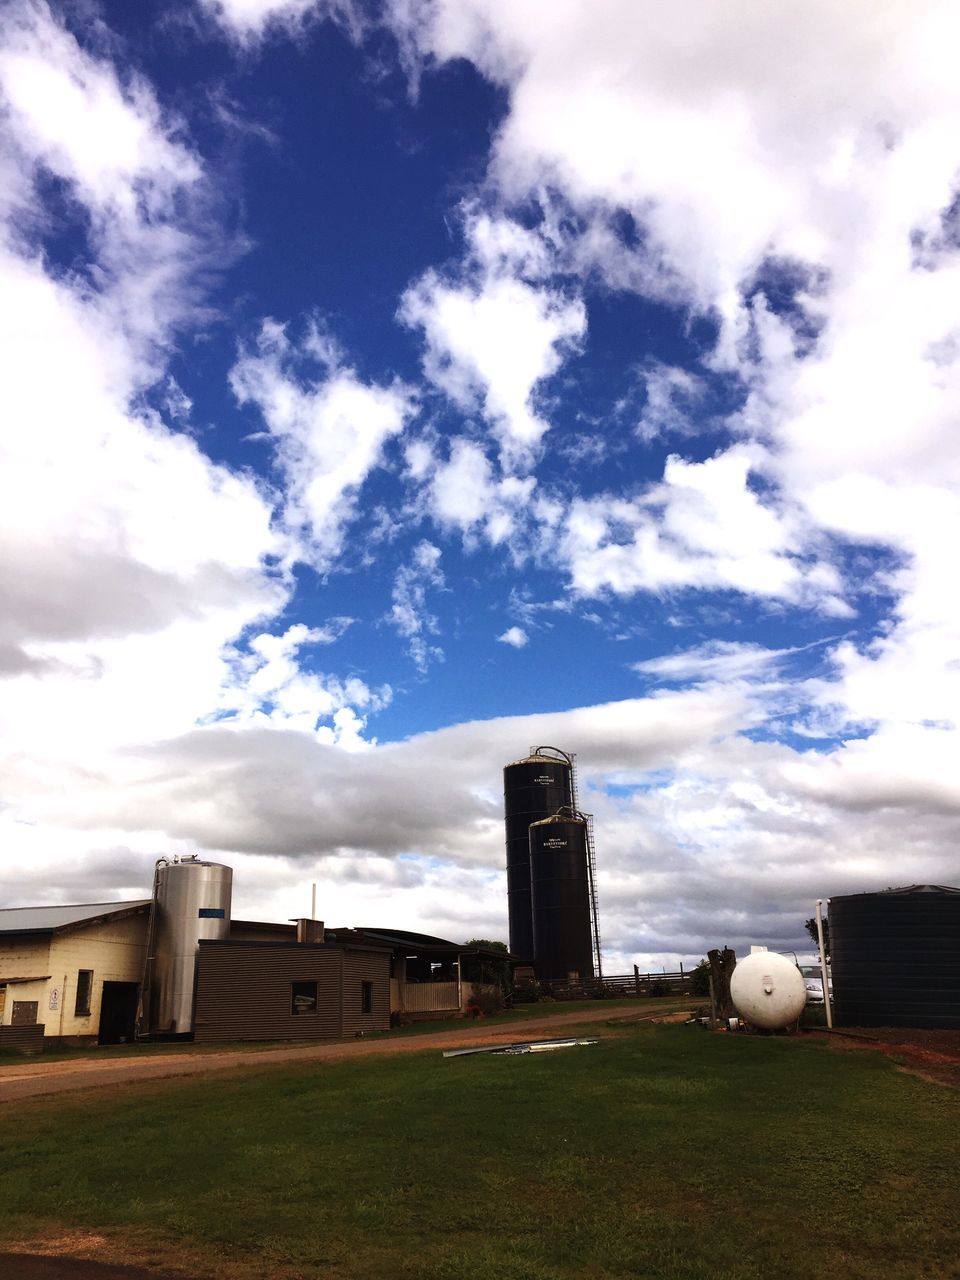 sky, architecture, built structure, cloud - sky, field, grass, cloudy, cloud, landscape, rural scene, grassy, no people, day, factory, outdoors, nature, overcast, weather, horizon over land, tranquility